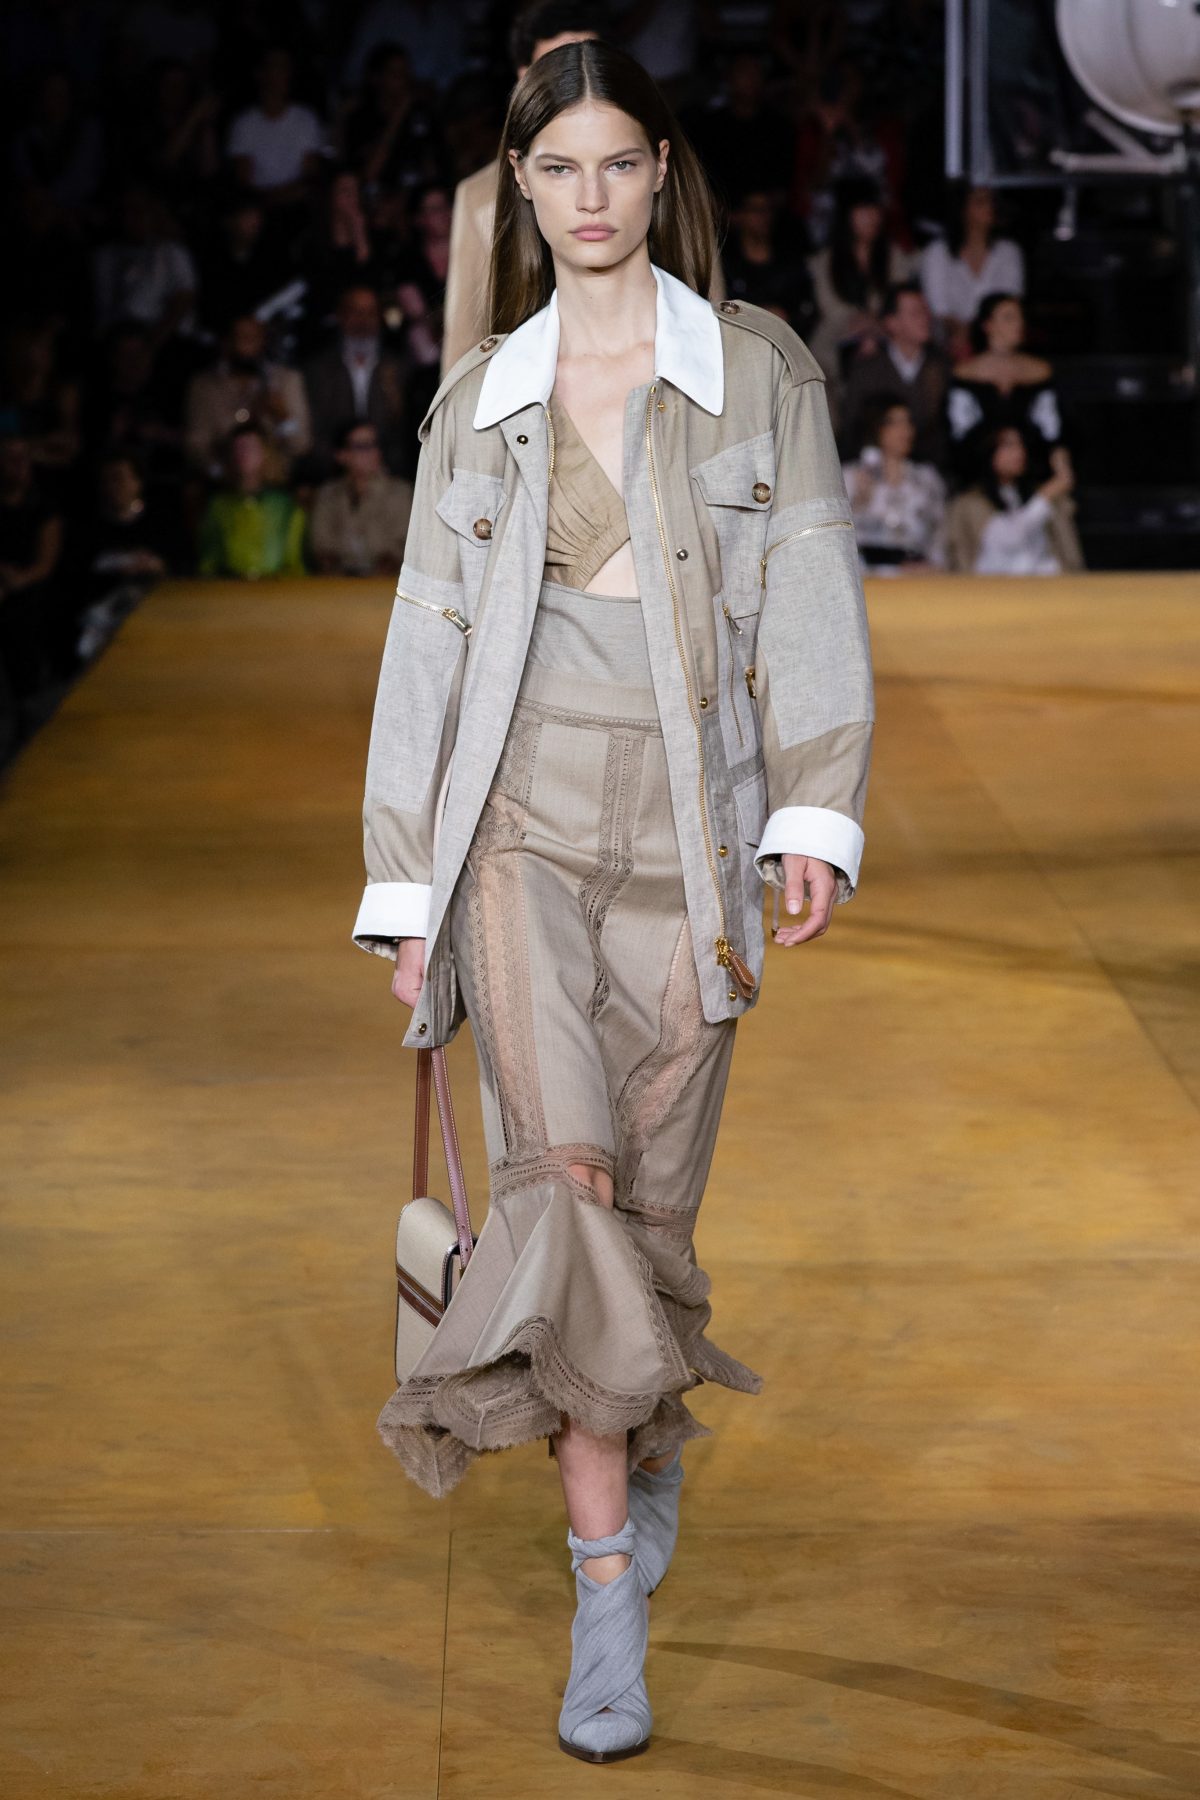 Burberry Spring/Summer 2020 Ready-to-Wear Show Review